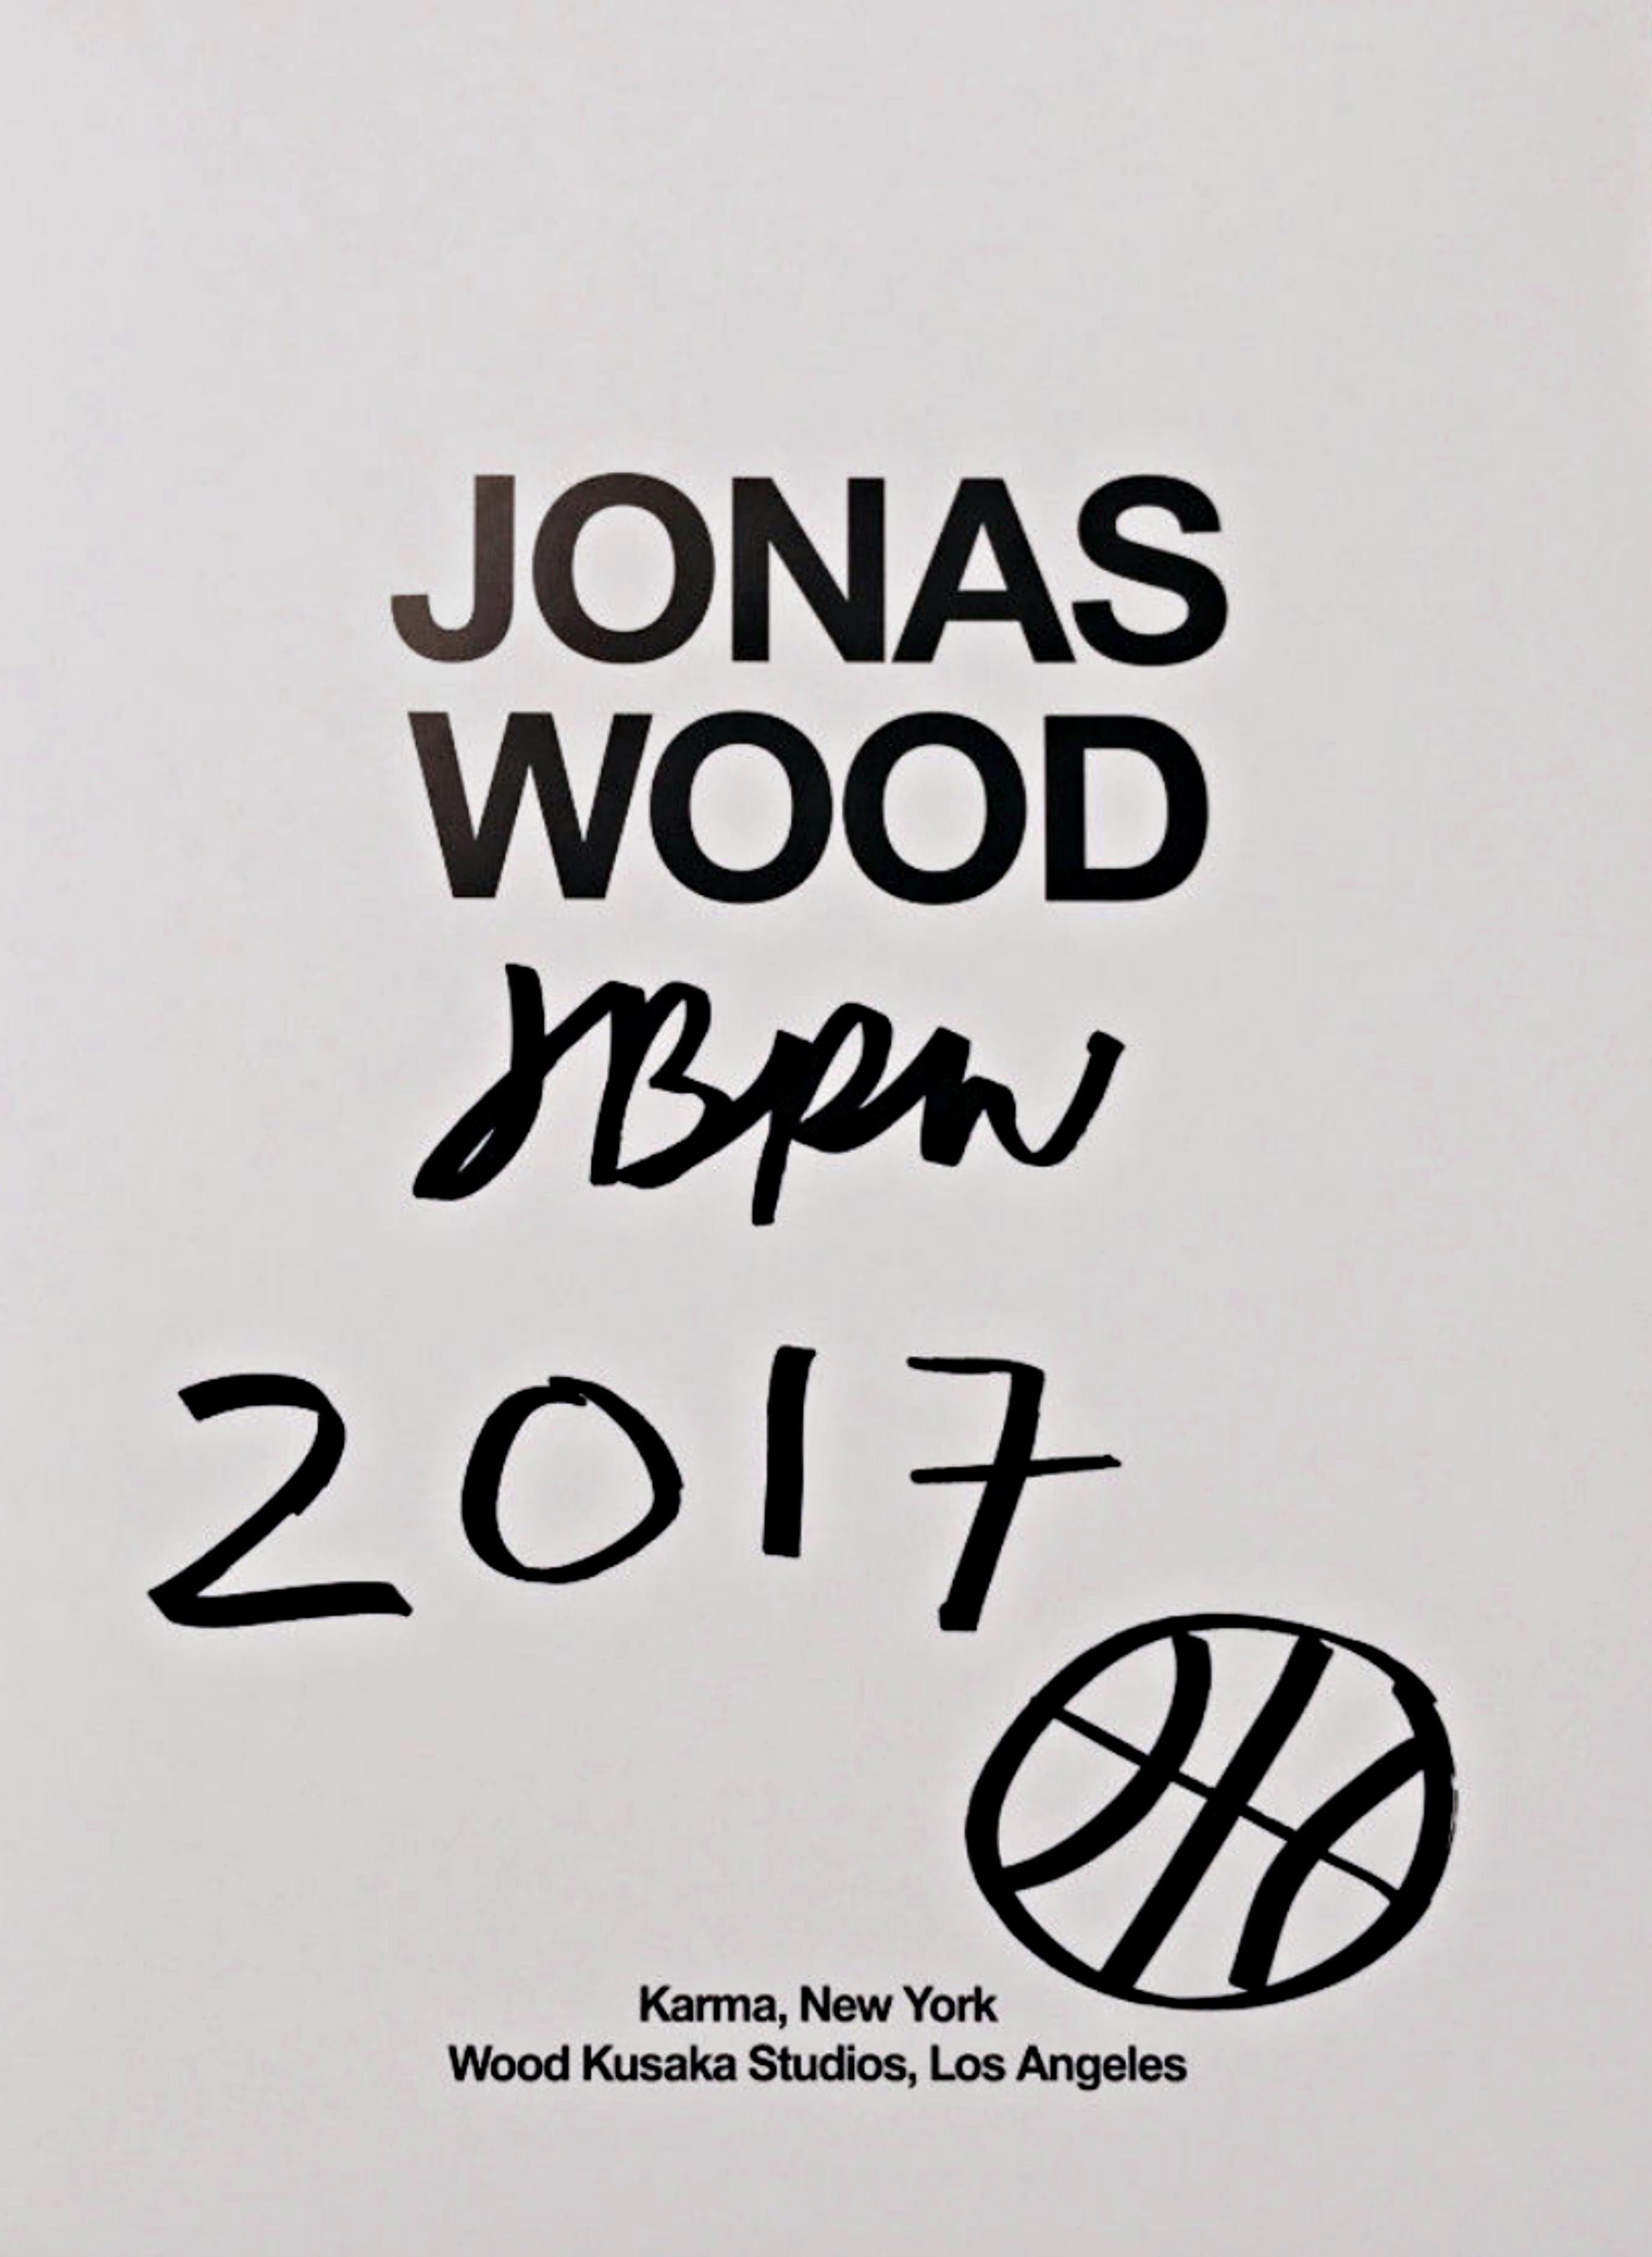 Clippings: hardback monograph, hand signed with the artist's baseball drawing - Print by Jonas Wood